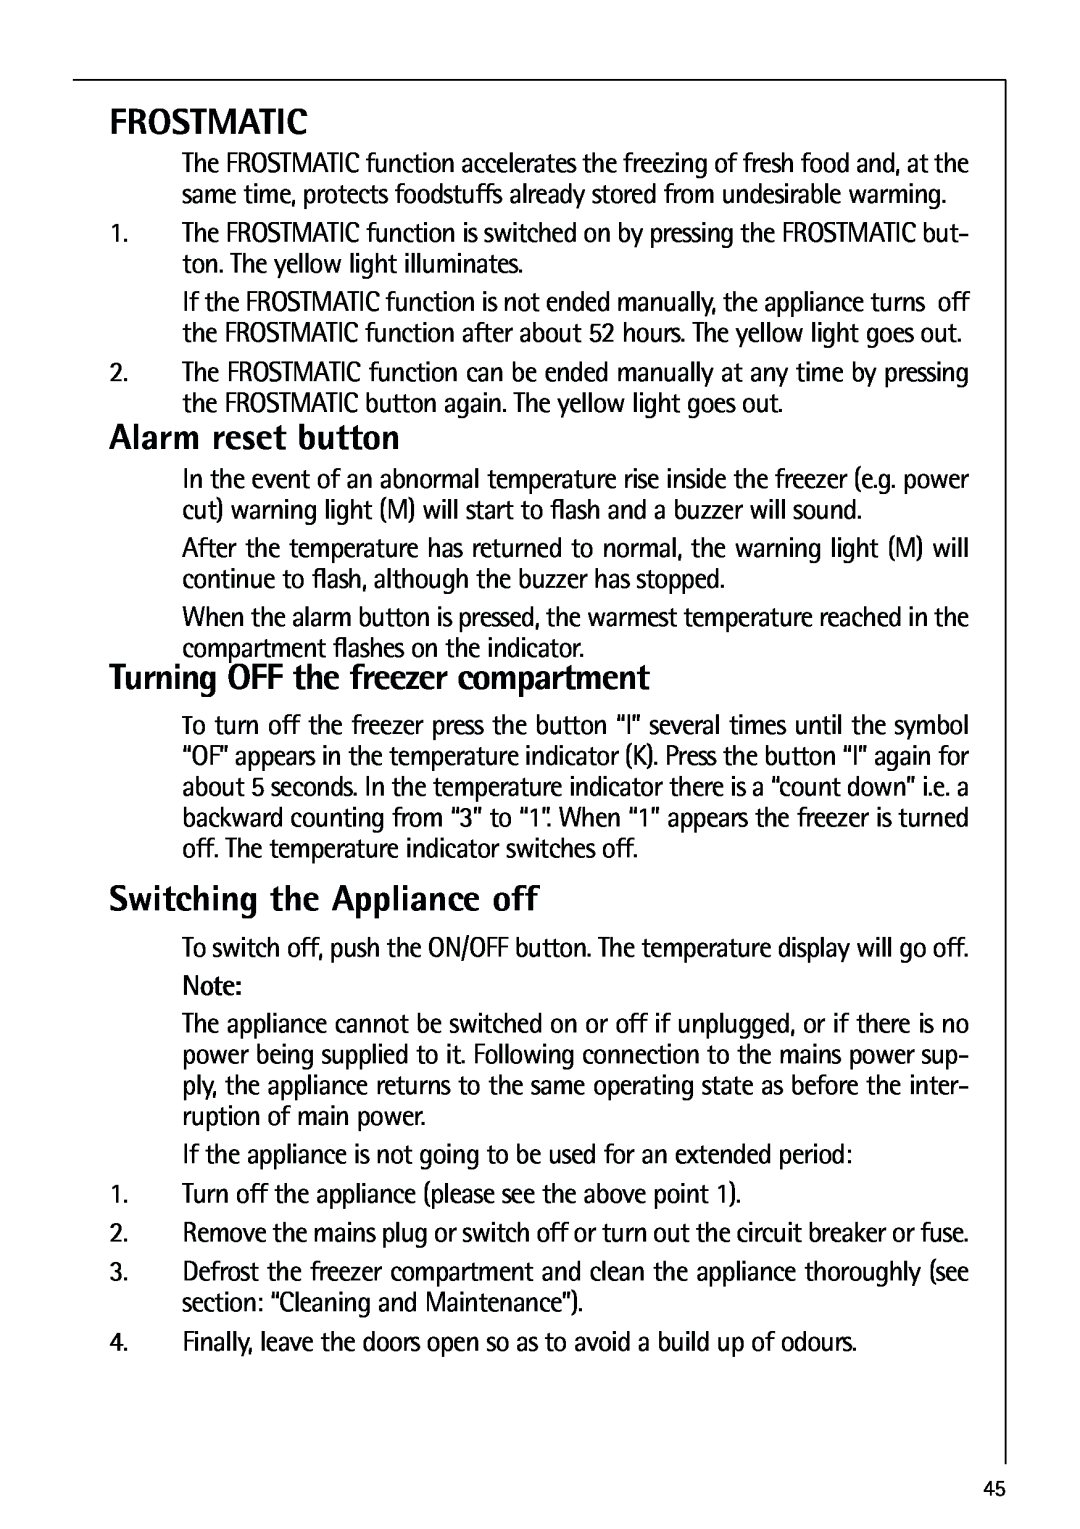 AEG 80318-5 KG user manual Frostmatic, Alarm reset button, Turning OFF the freezer compartment, Switching the Appliance off 